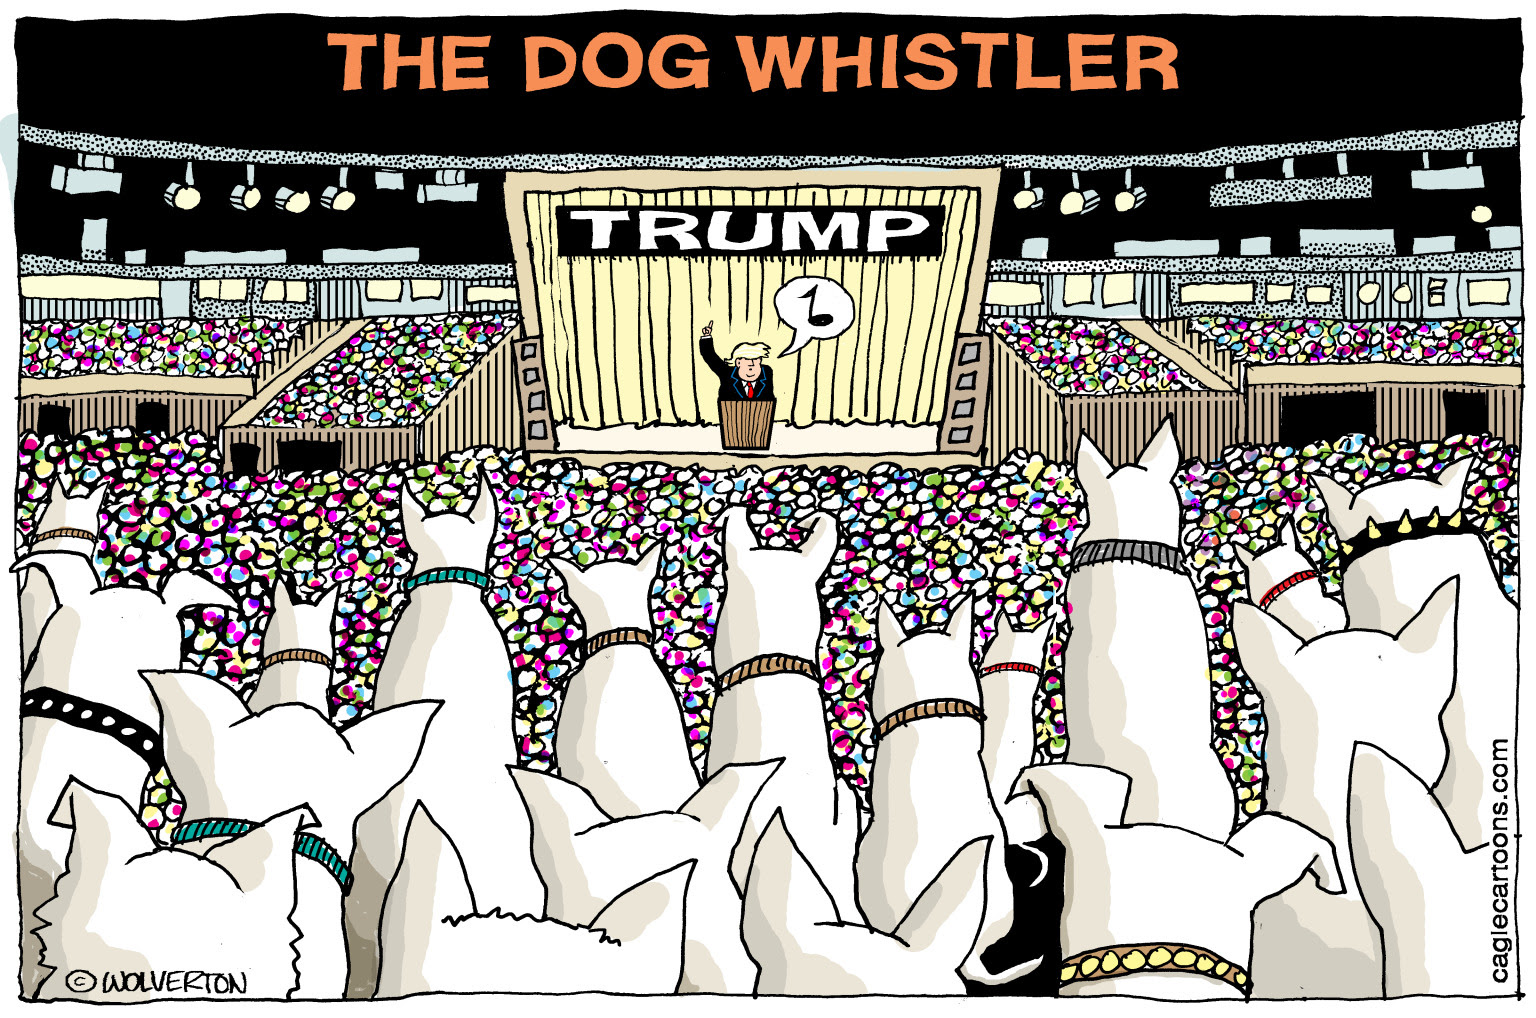 Dog whistle politics send coded messages